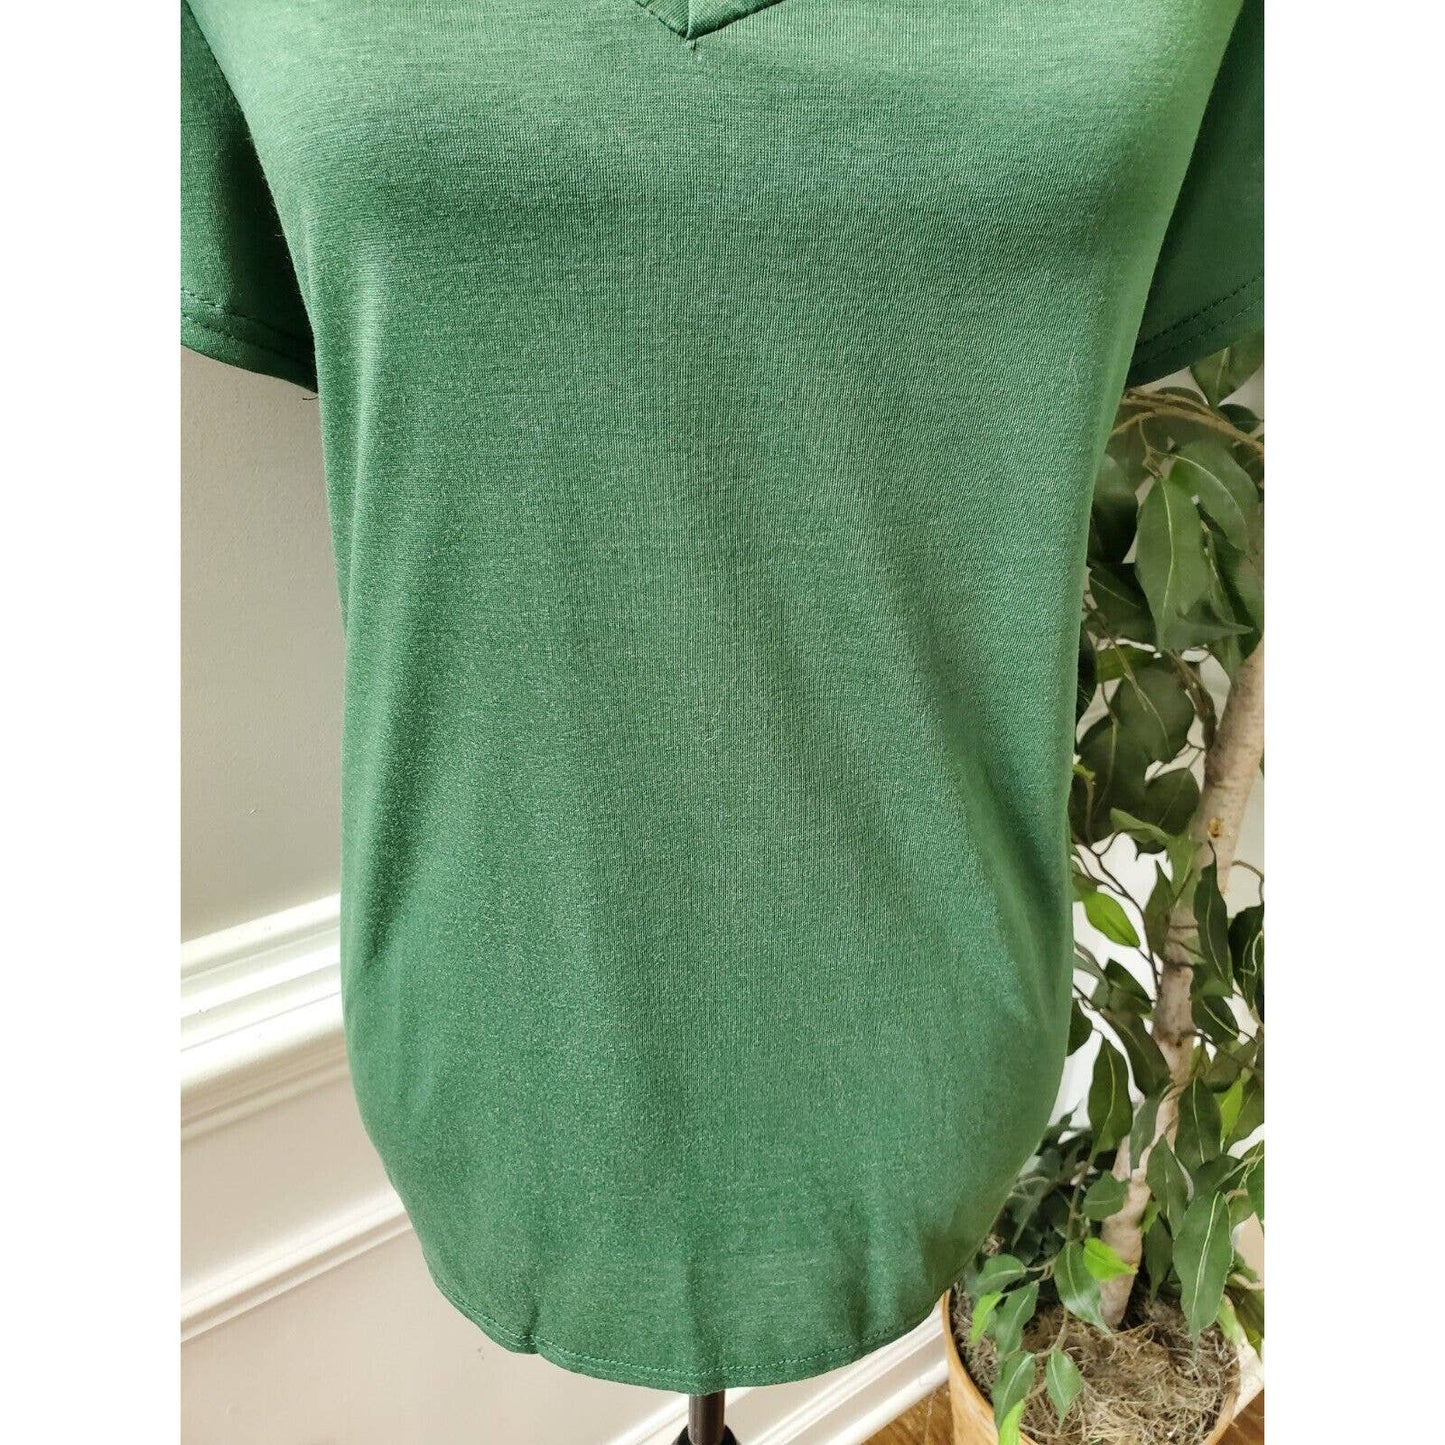 SHEIN Women's Green Polyester V-Neck Short Sleeve Casual Top Shirt Size Large